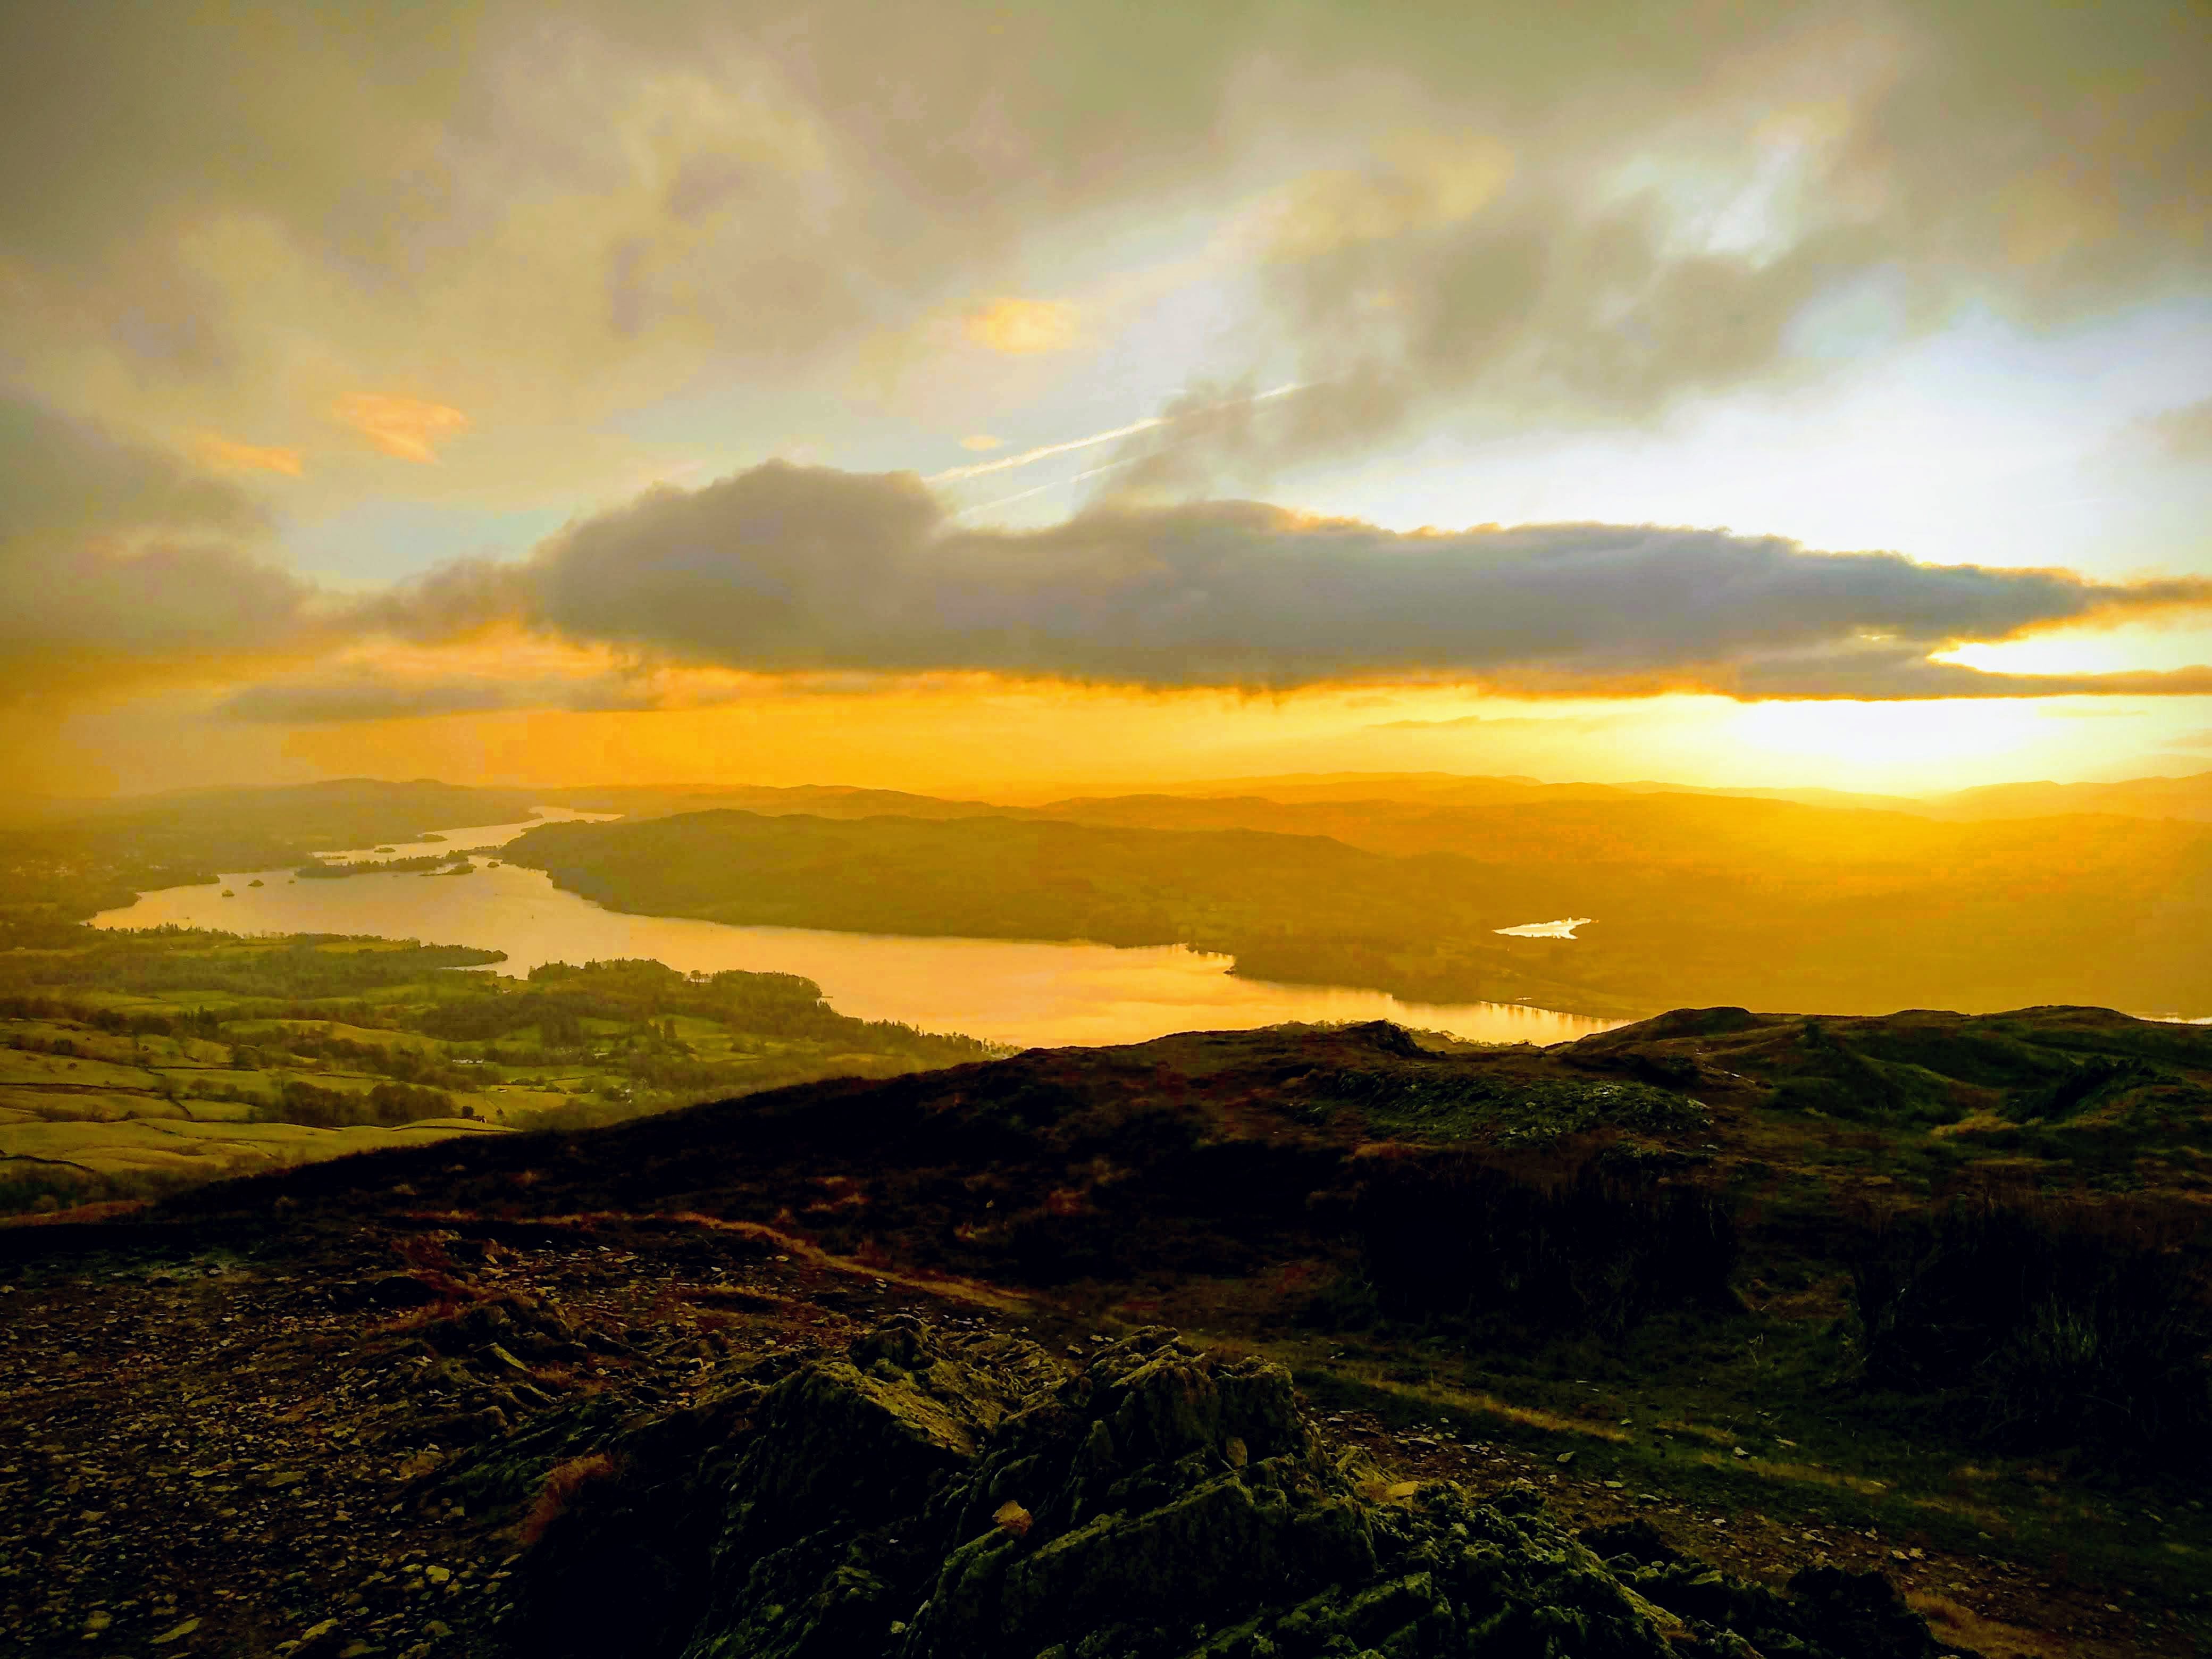 A landscape photograph over the sunset over a lake from the top of a hill.